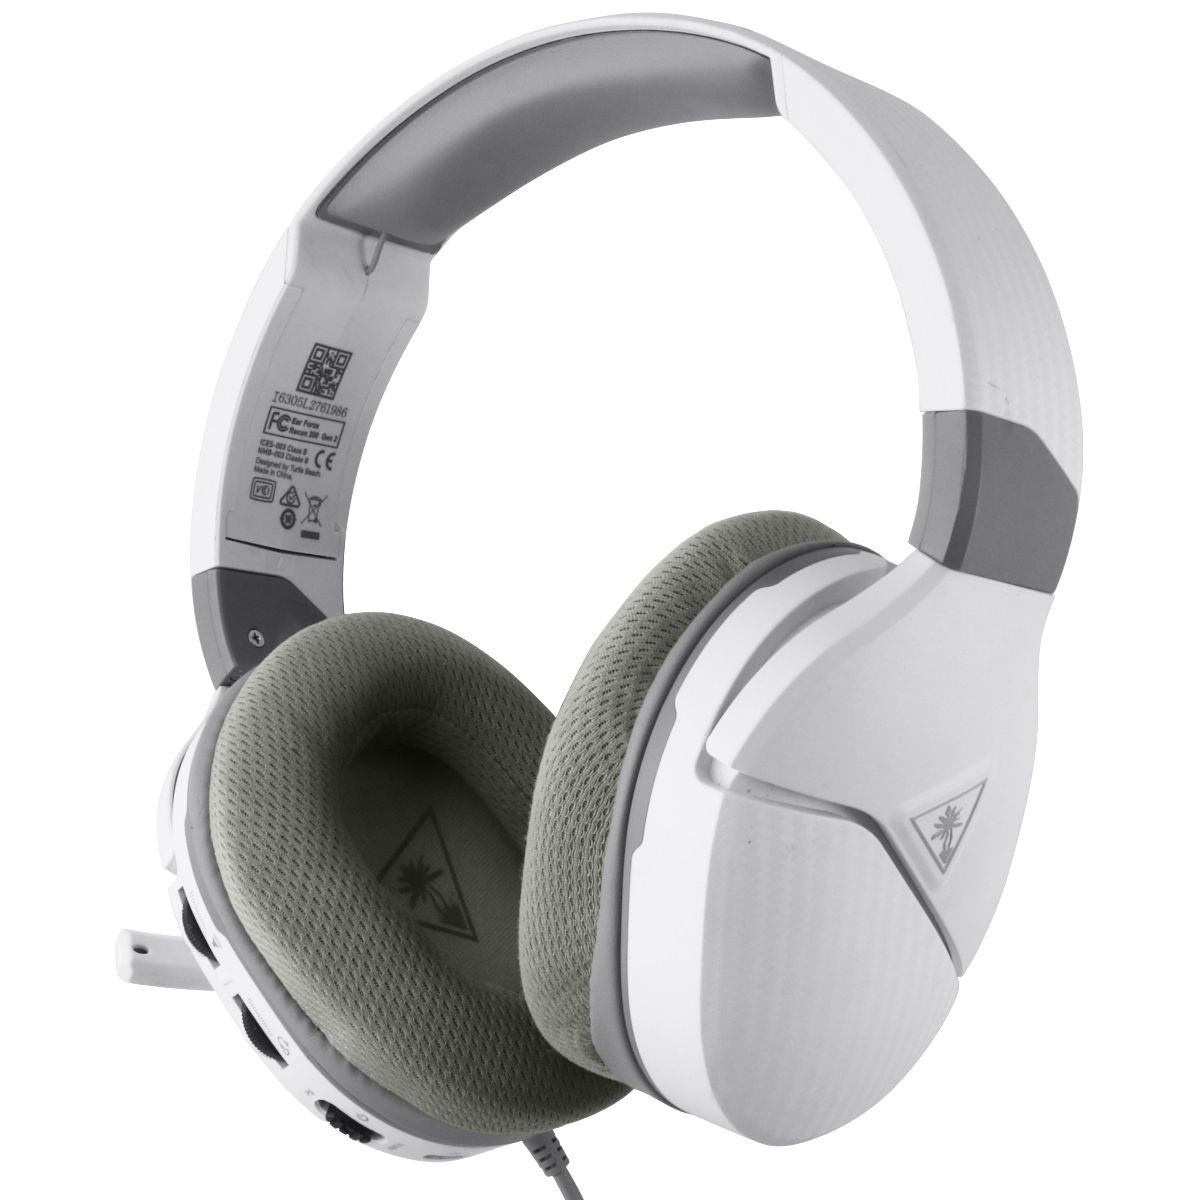 TURTLE BEACH Recon 200 Gen 2 Amplified Gaming Headset - White/Black-blue